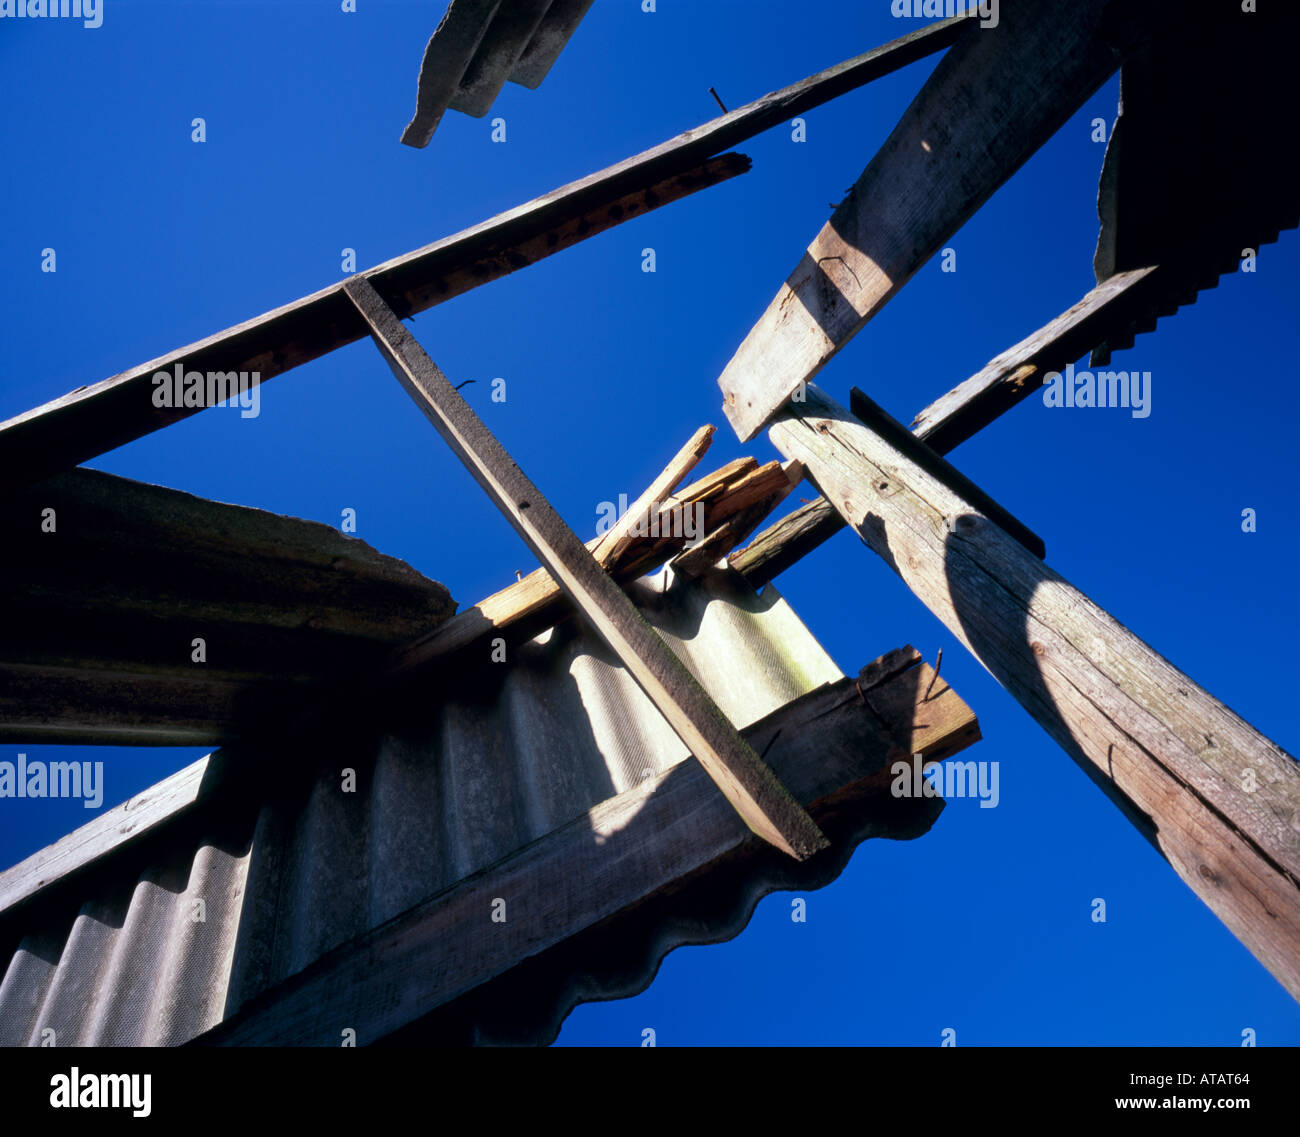 Abstract image of a broken down shed, under a deep blue sky. Stock Photo